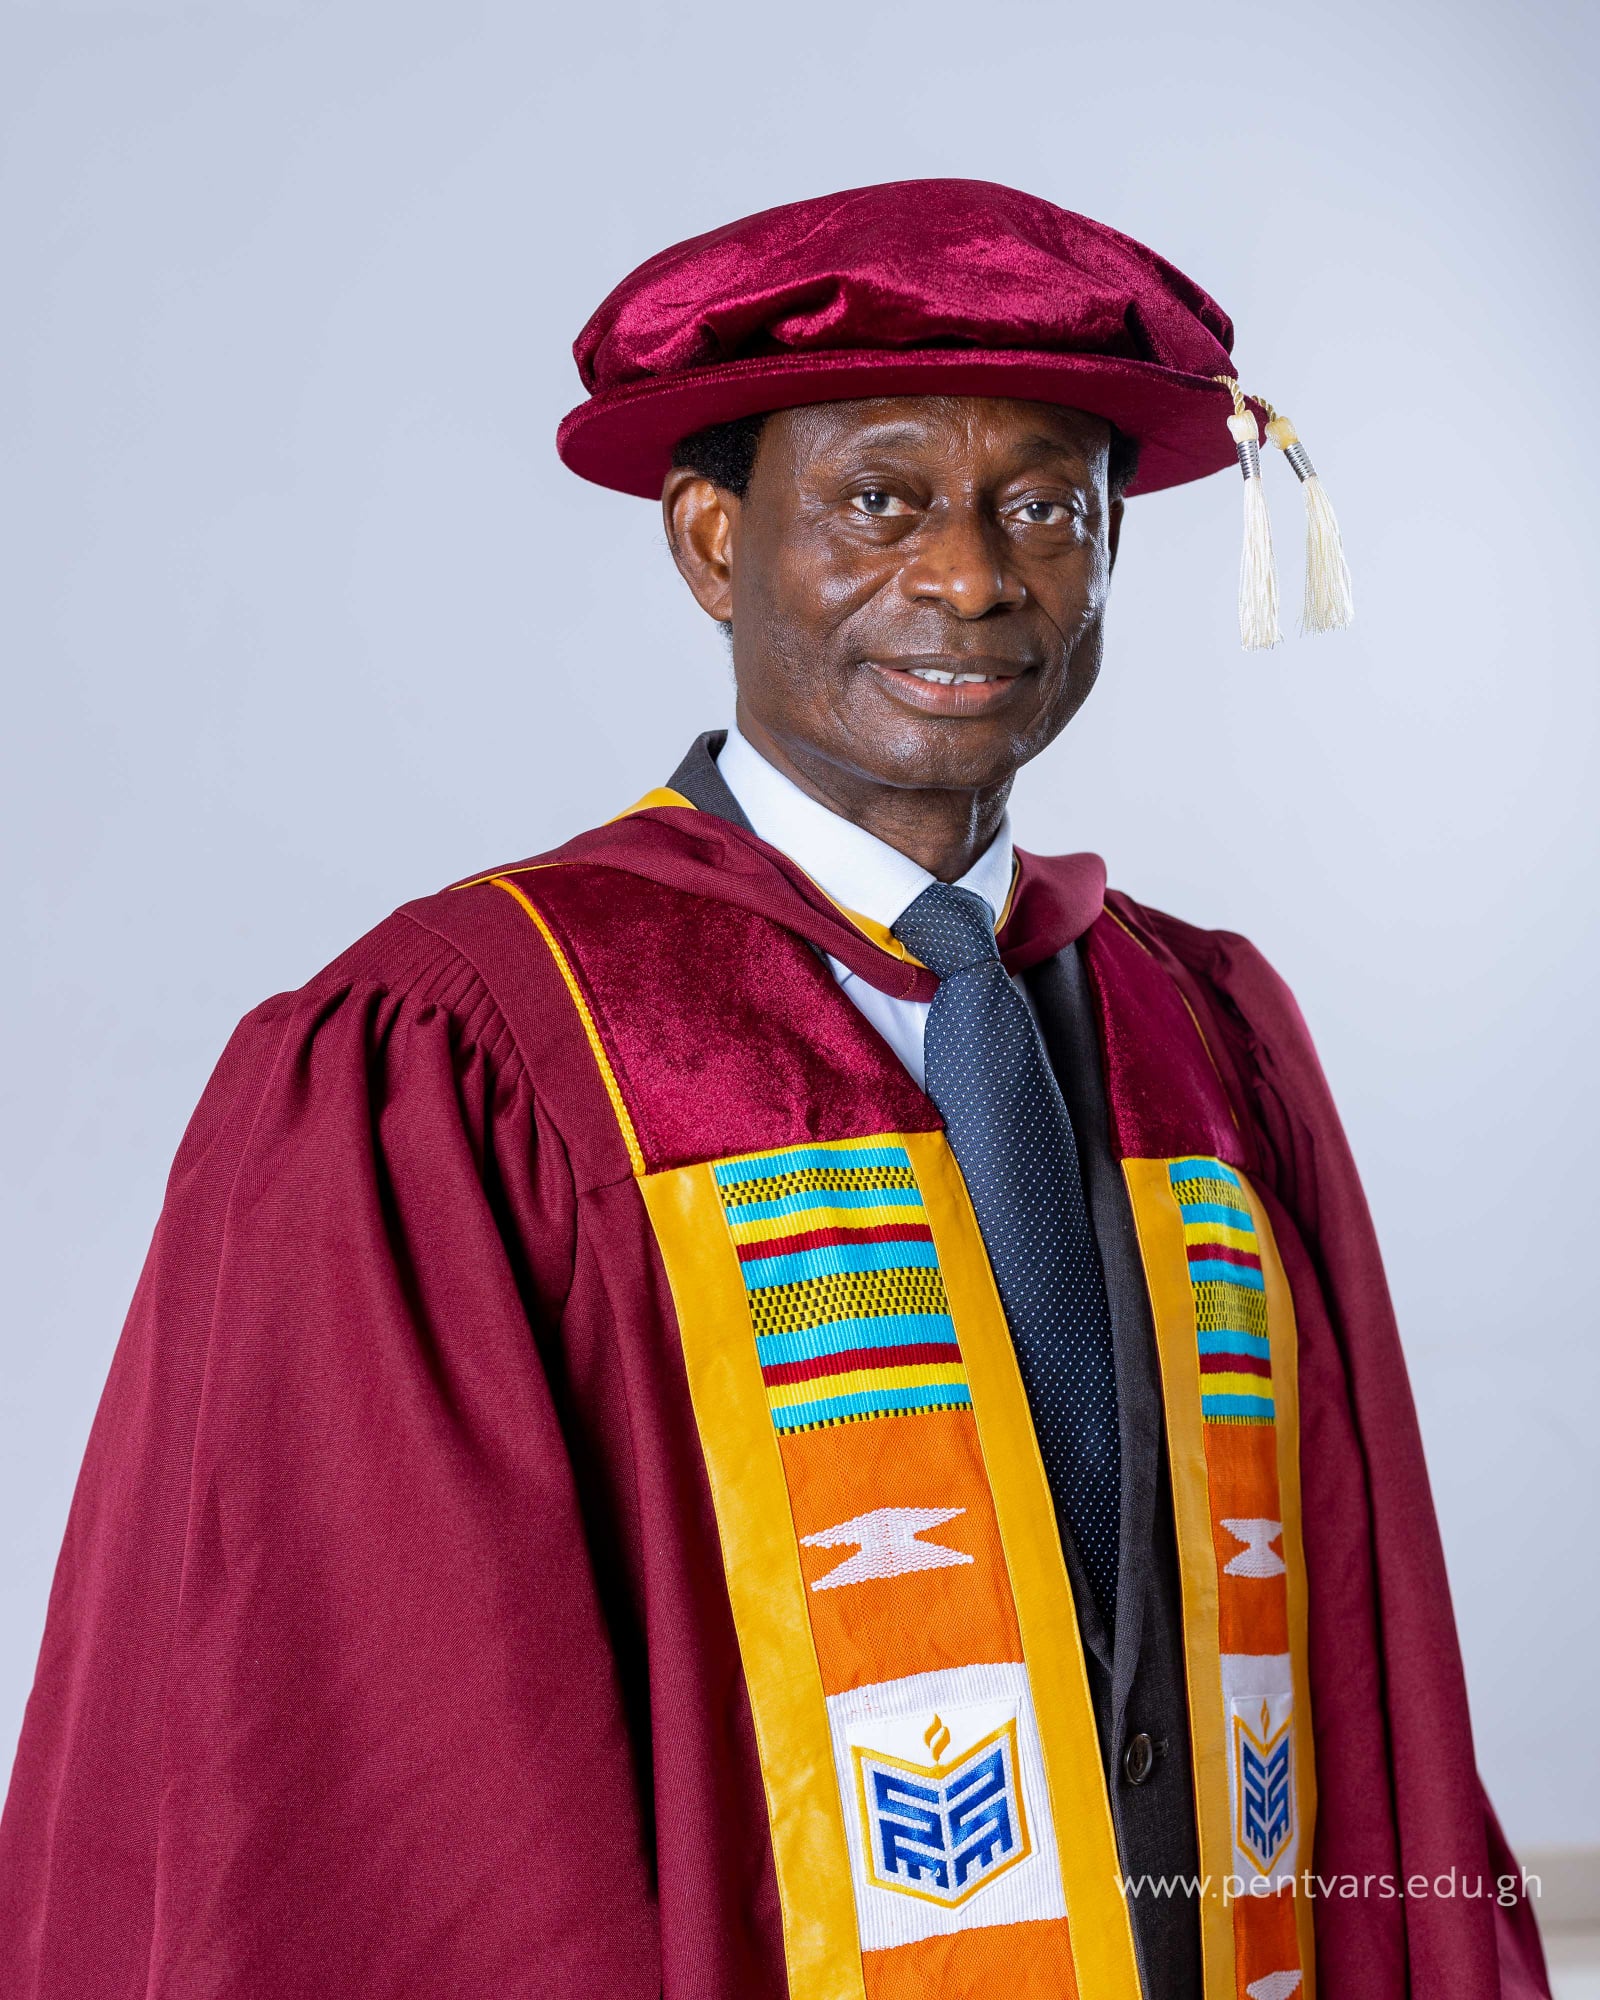 Pentecost University Professor Appointed Chairman, Board of Trustees of National Cathedral Project